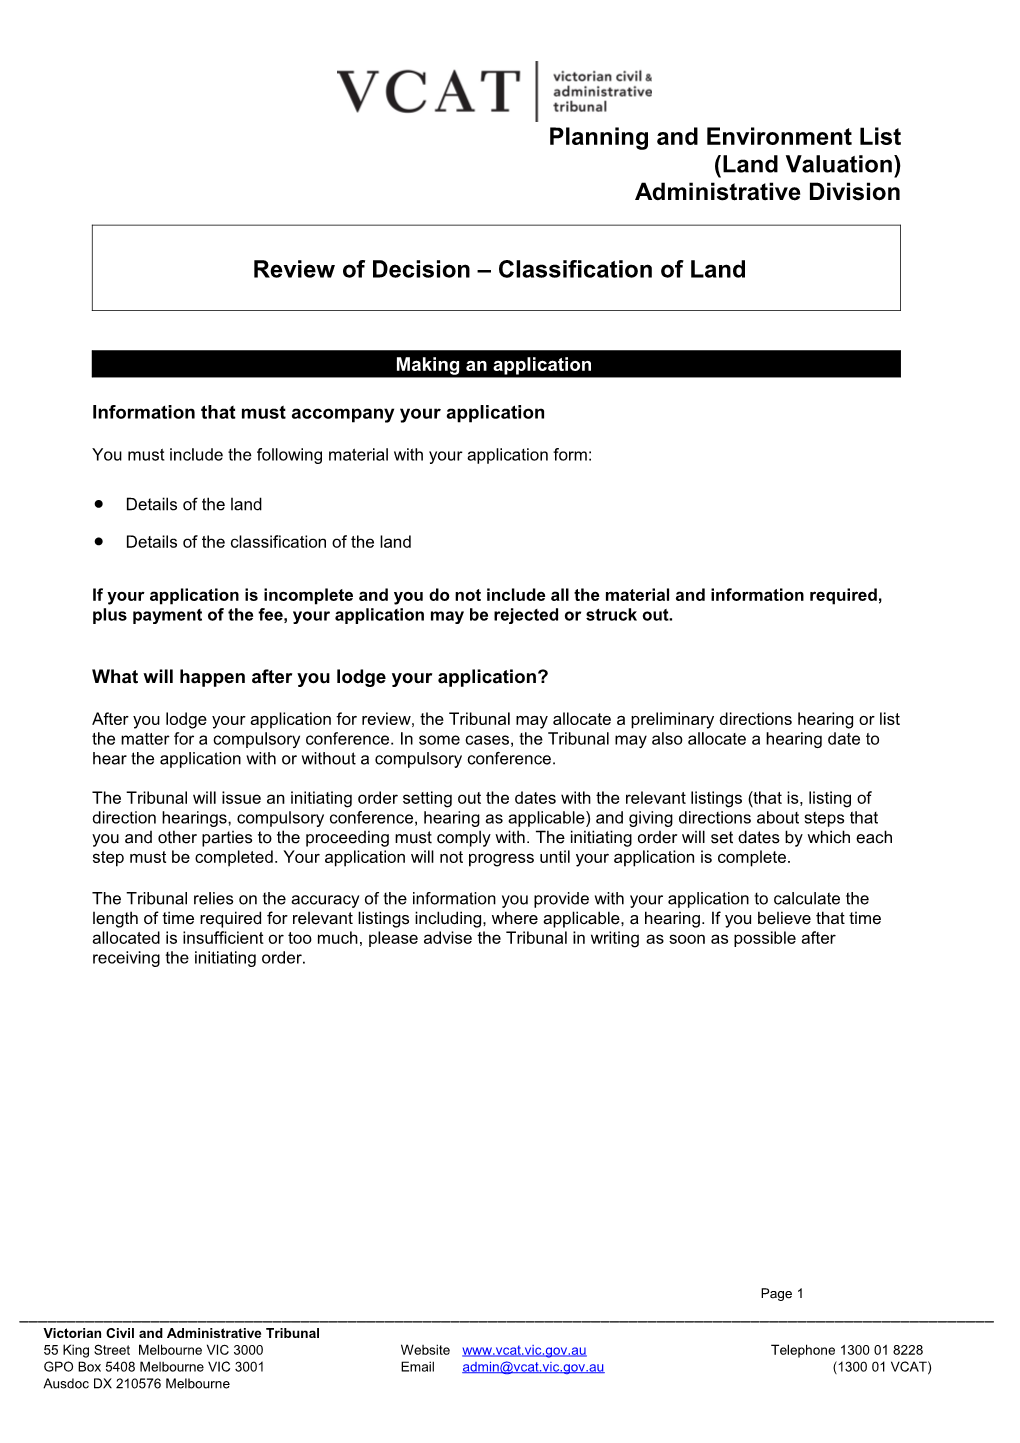 Application for Review of Decision - Classification of Land